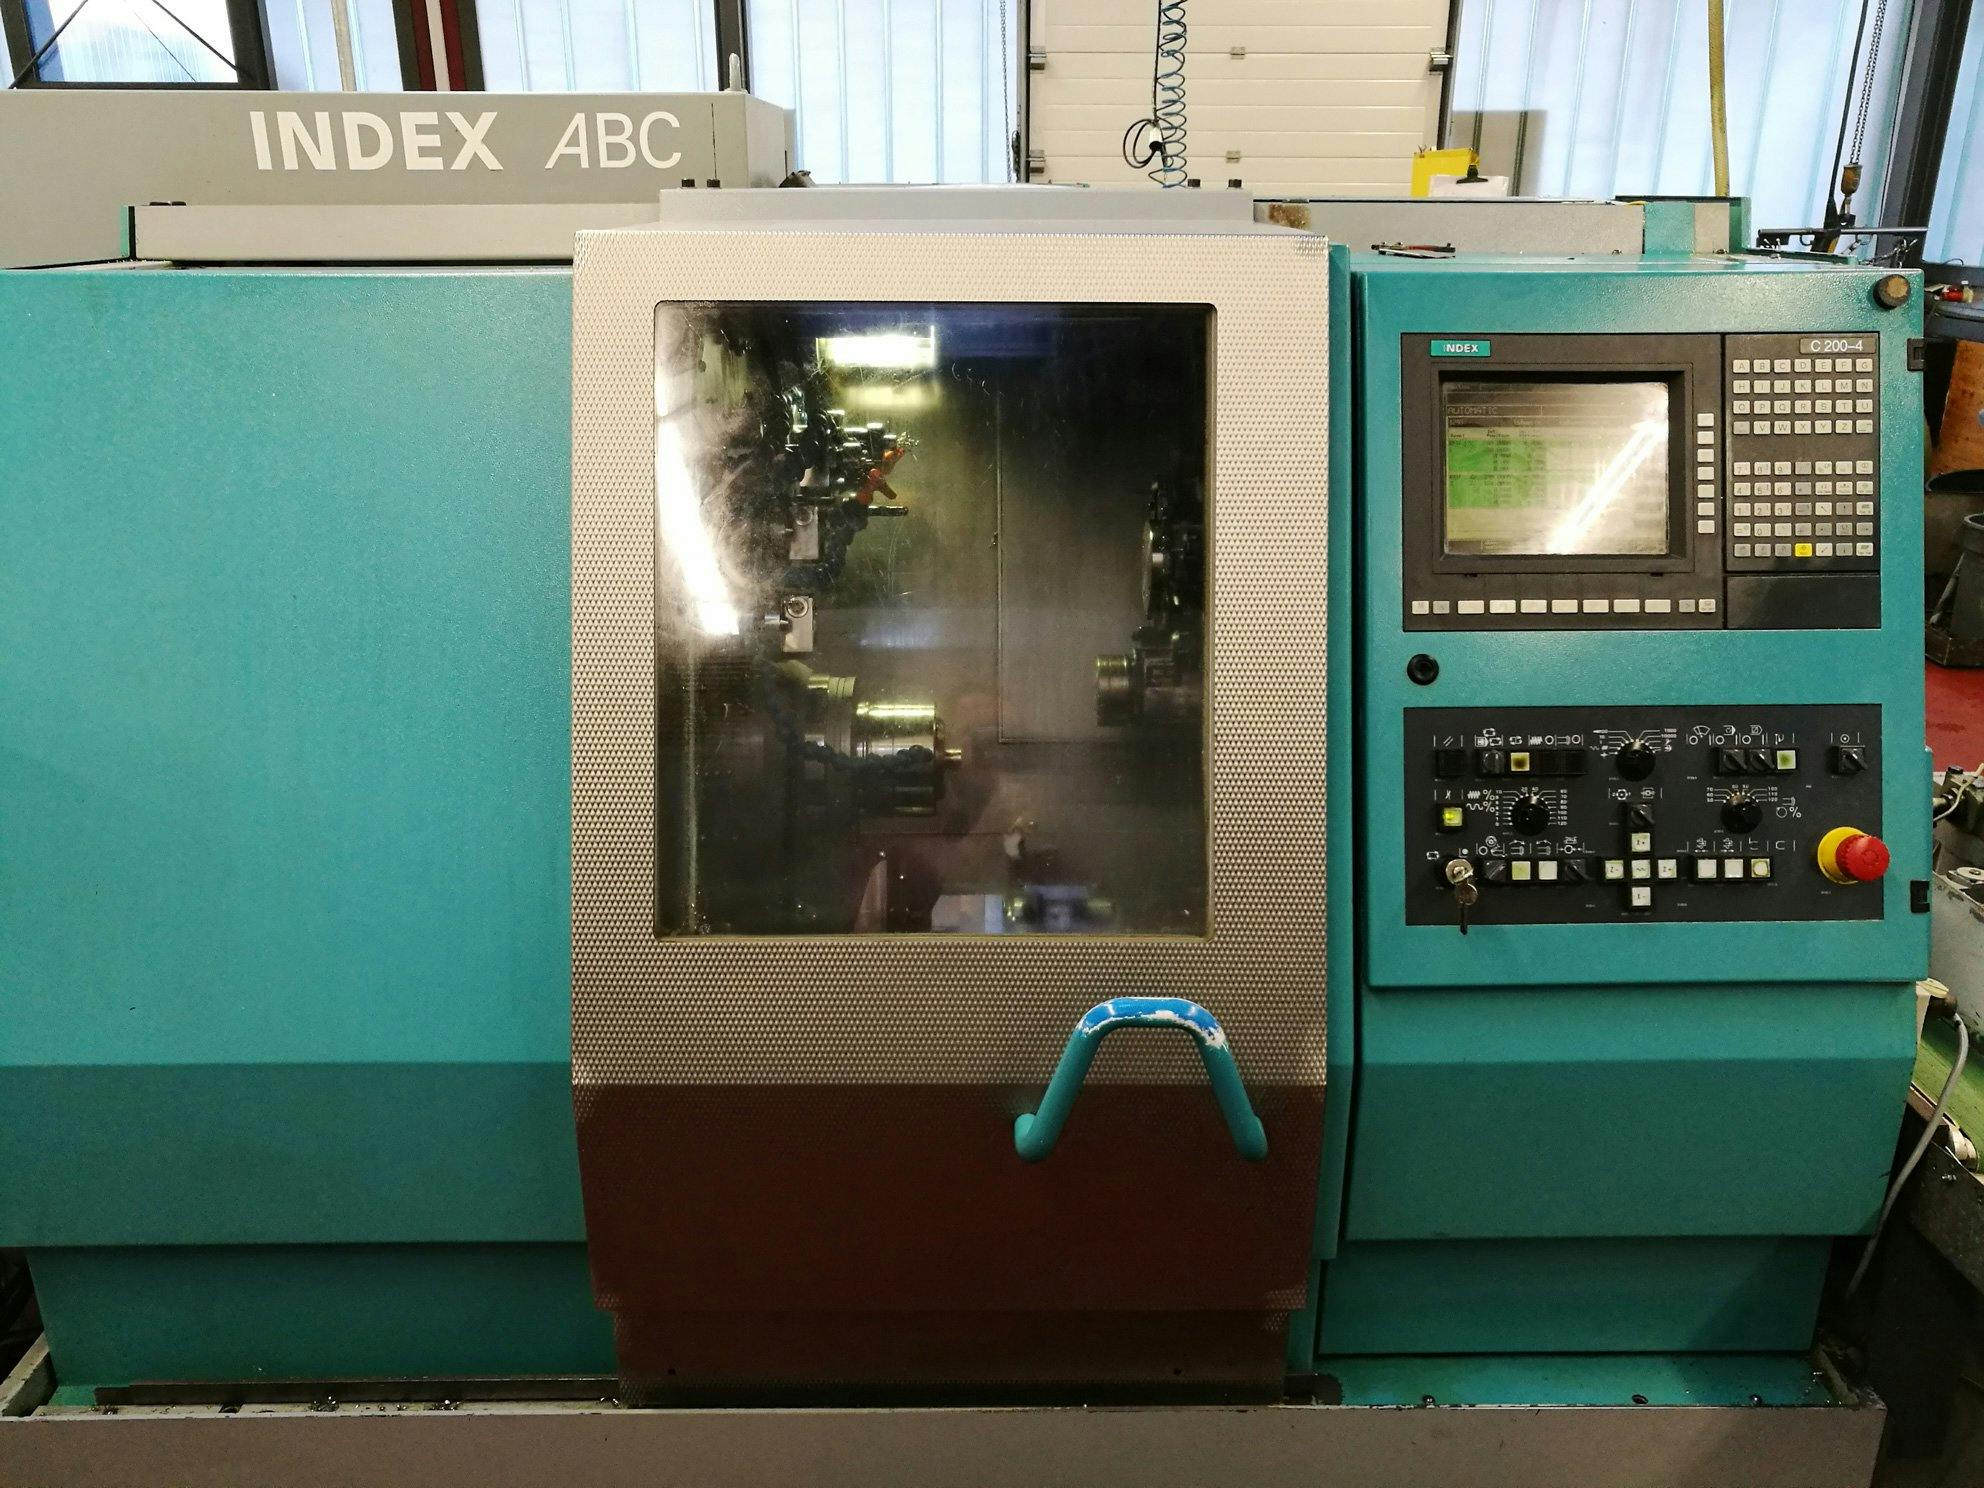 Front view of Index ABC machine